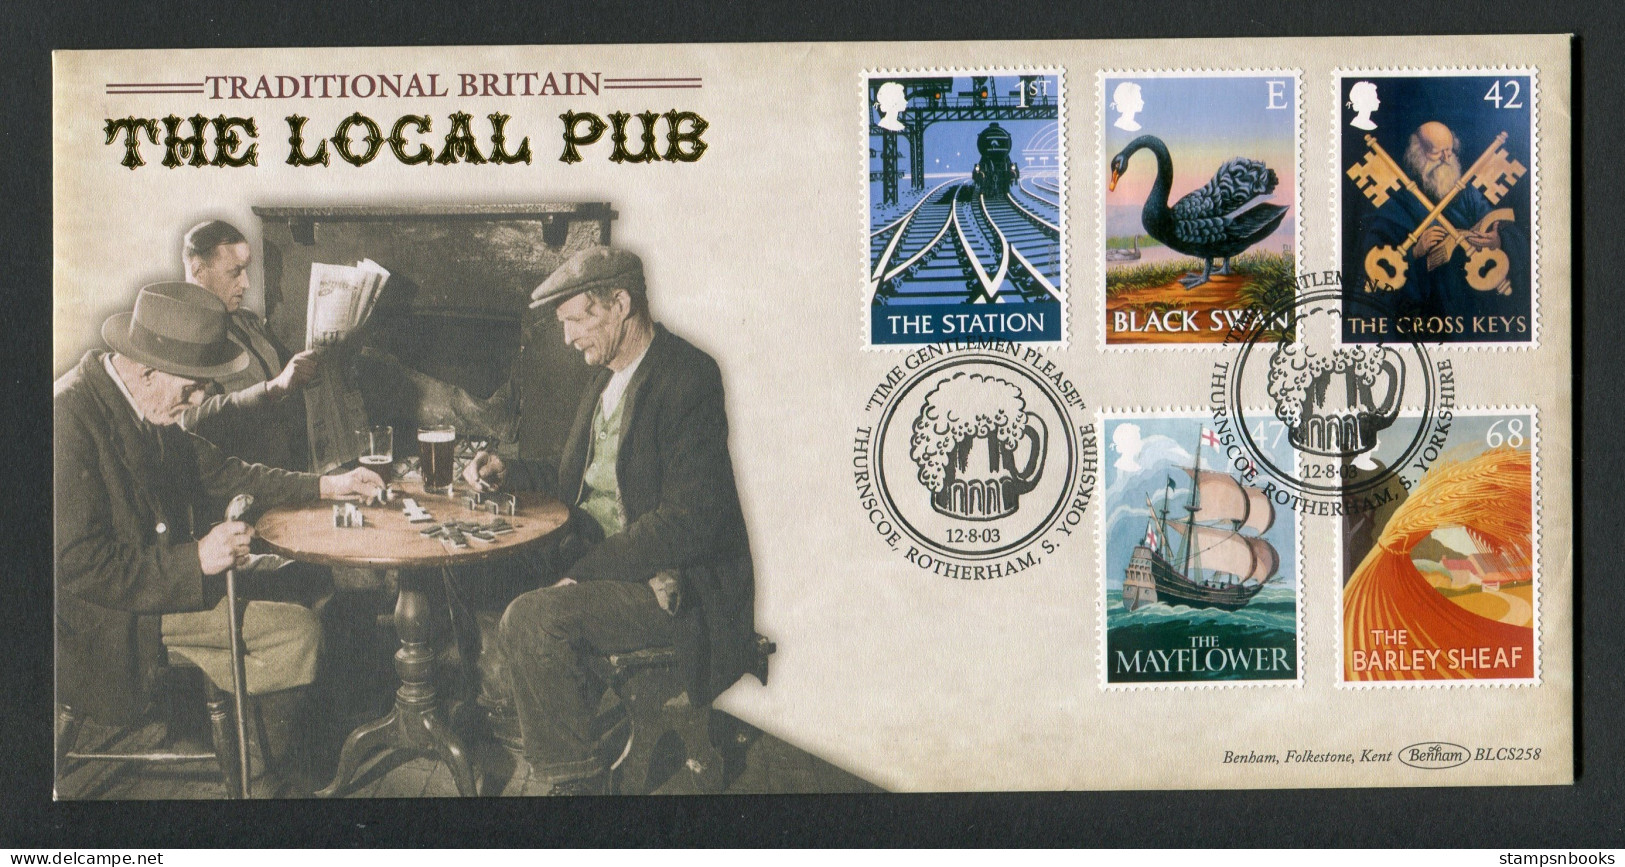 2003 GB "The Local Pub" Thurnscoe Rotherham First Day Cover, Pub Signs Benham Silk FDC - 2001-2010 Decimal Issues